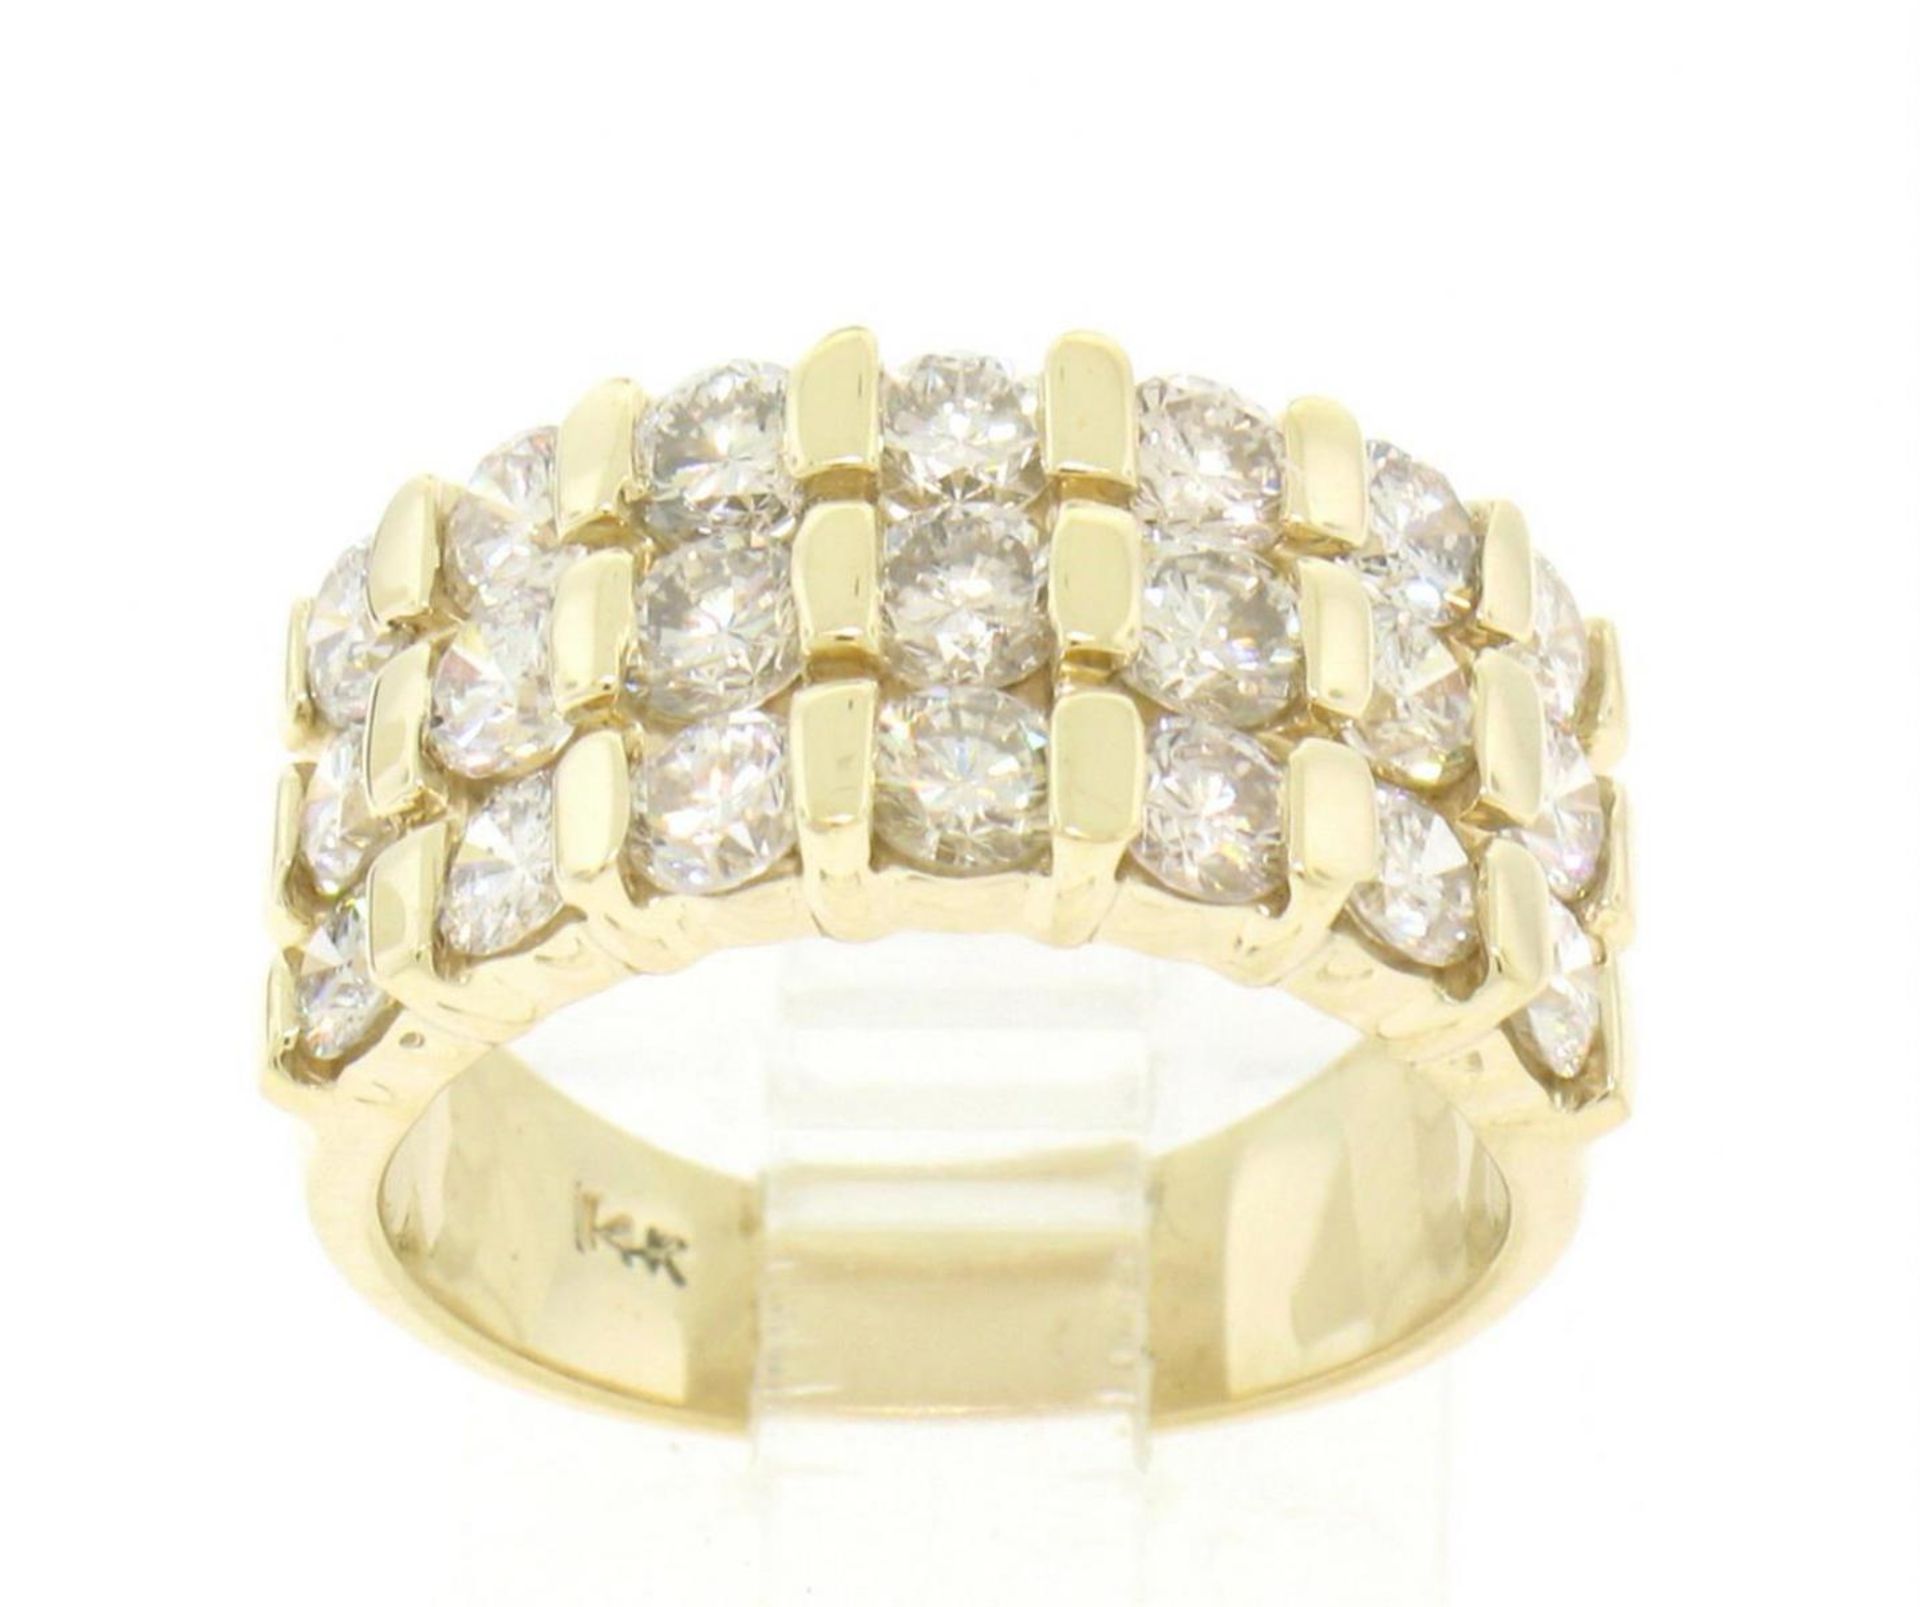 14kt Yellow Gold 2.52 ctw Wide 3 Row Large Round Diamond Band Ring - Image 2 of 6